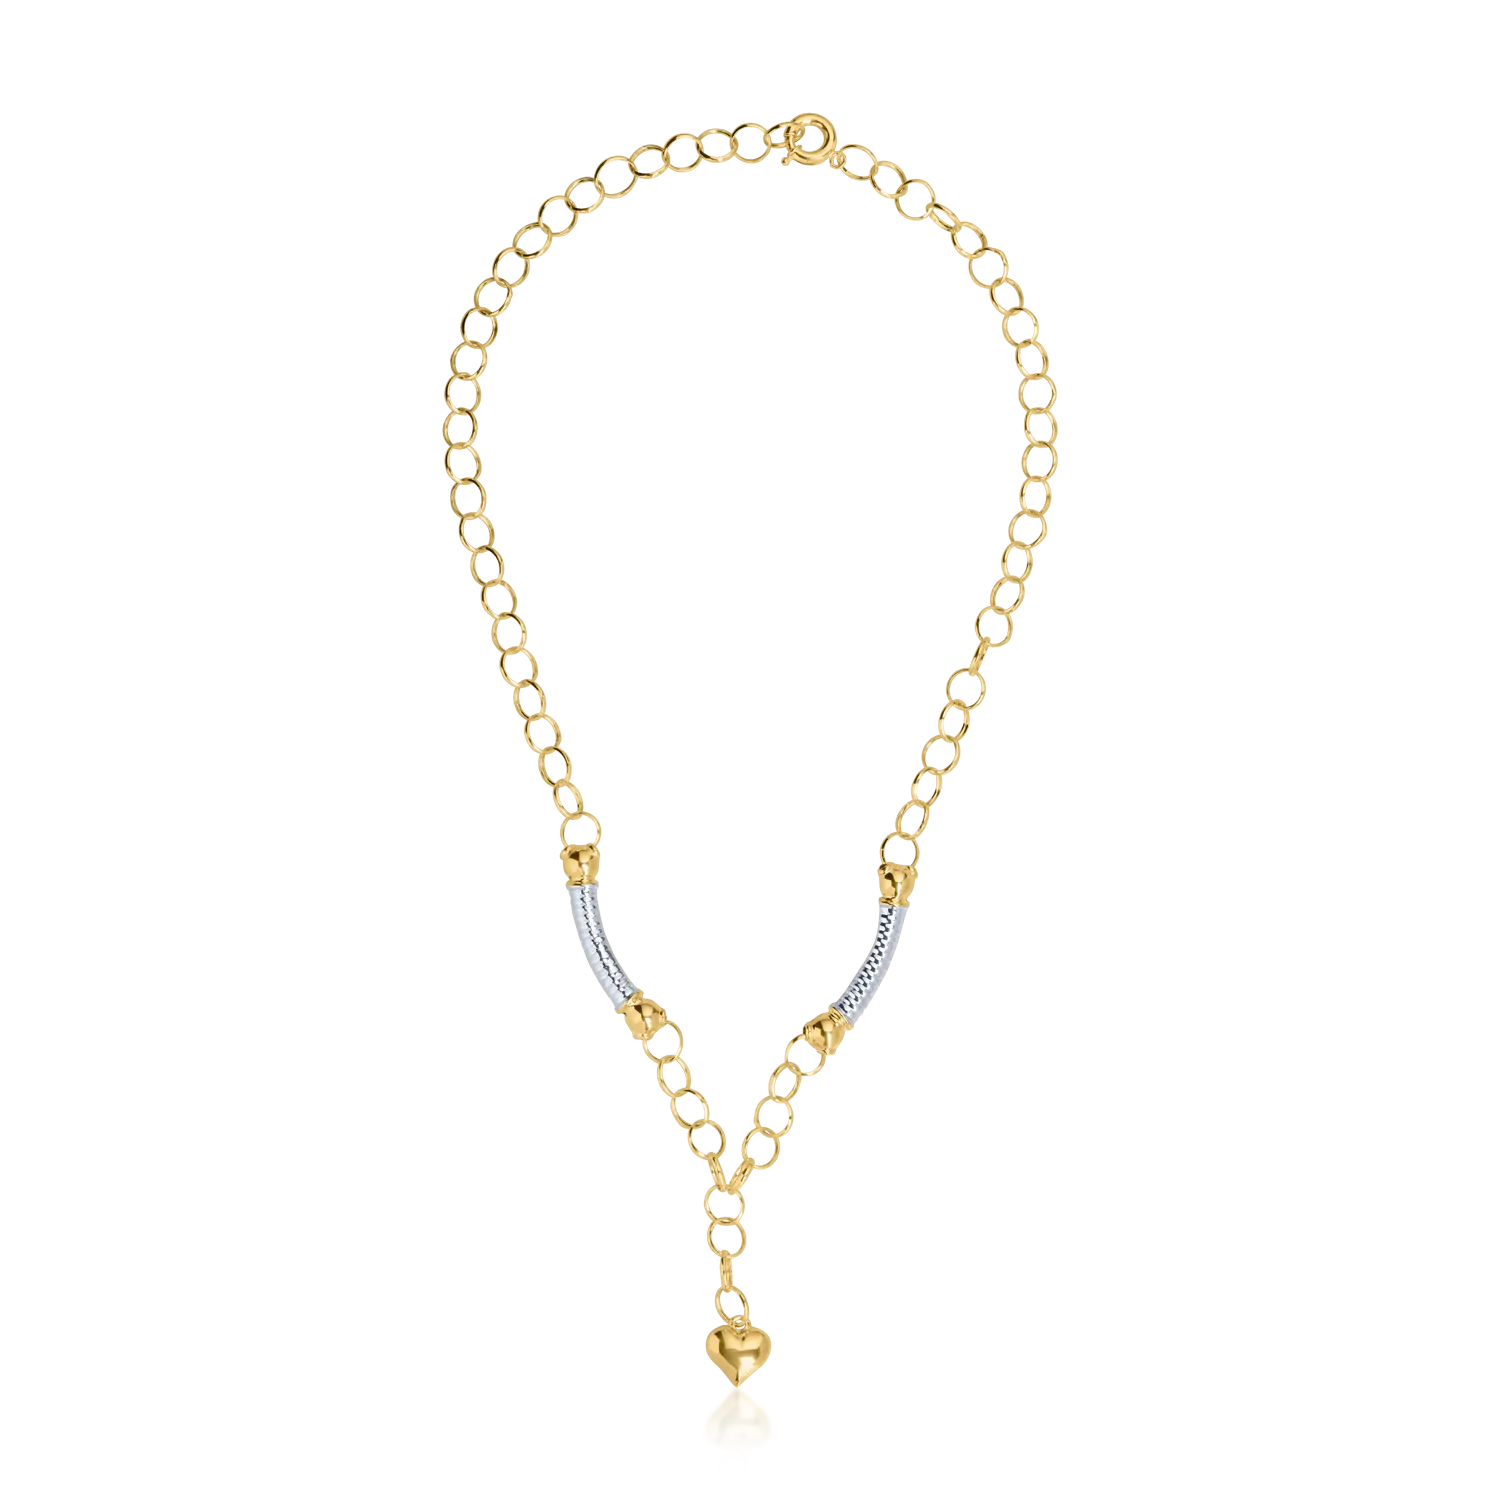 White-yellow gold heart pendant necklace